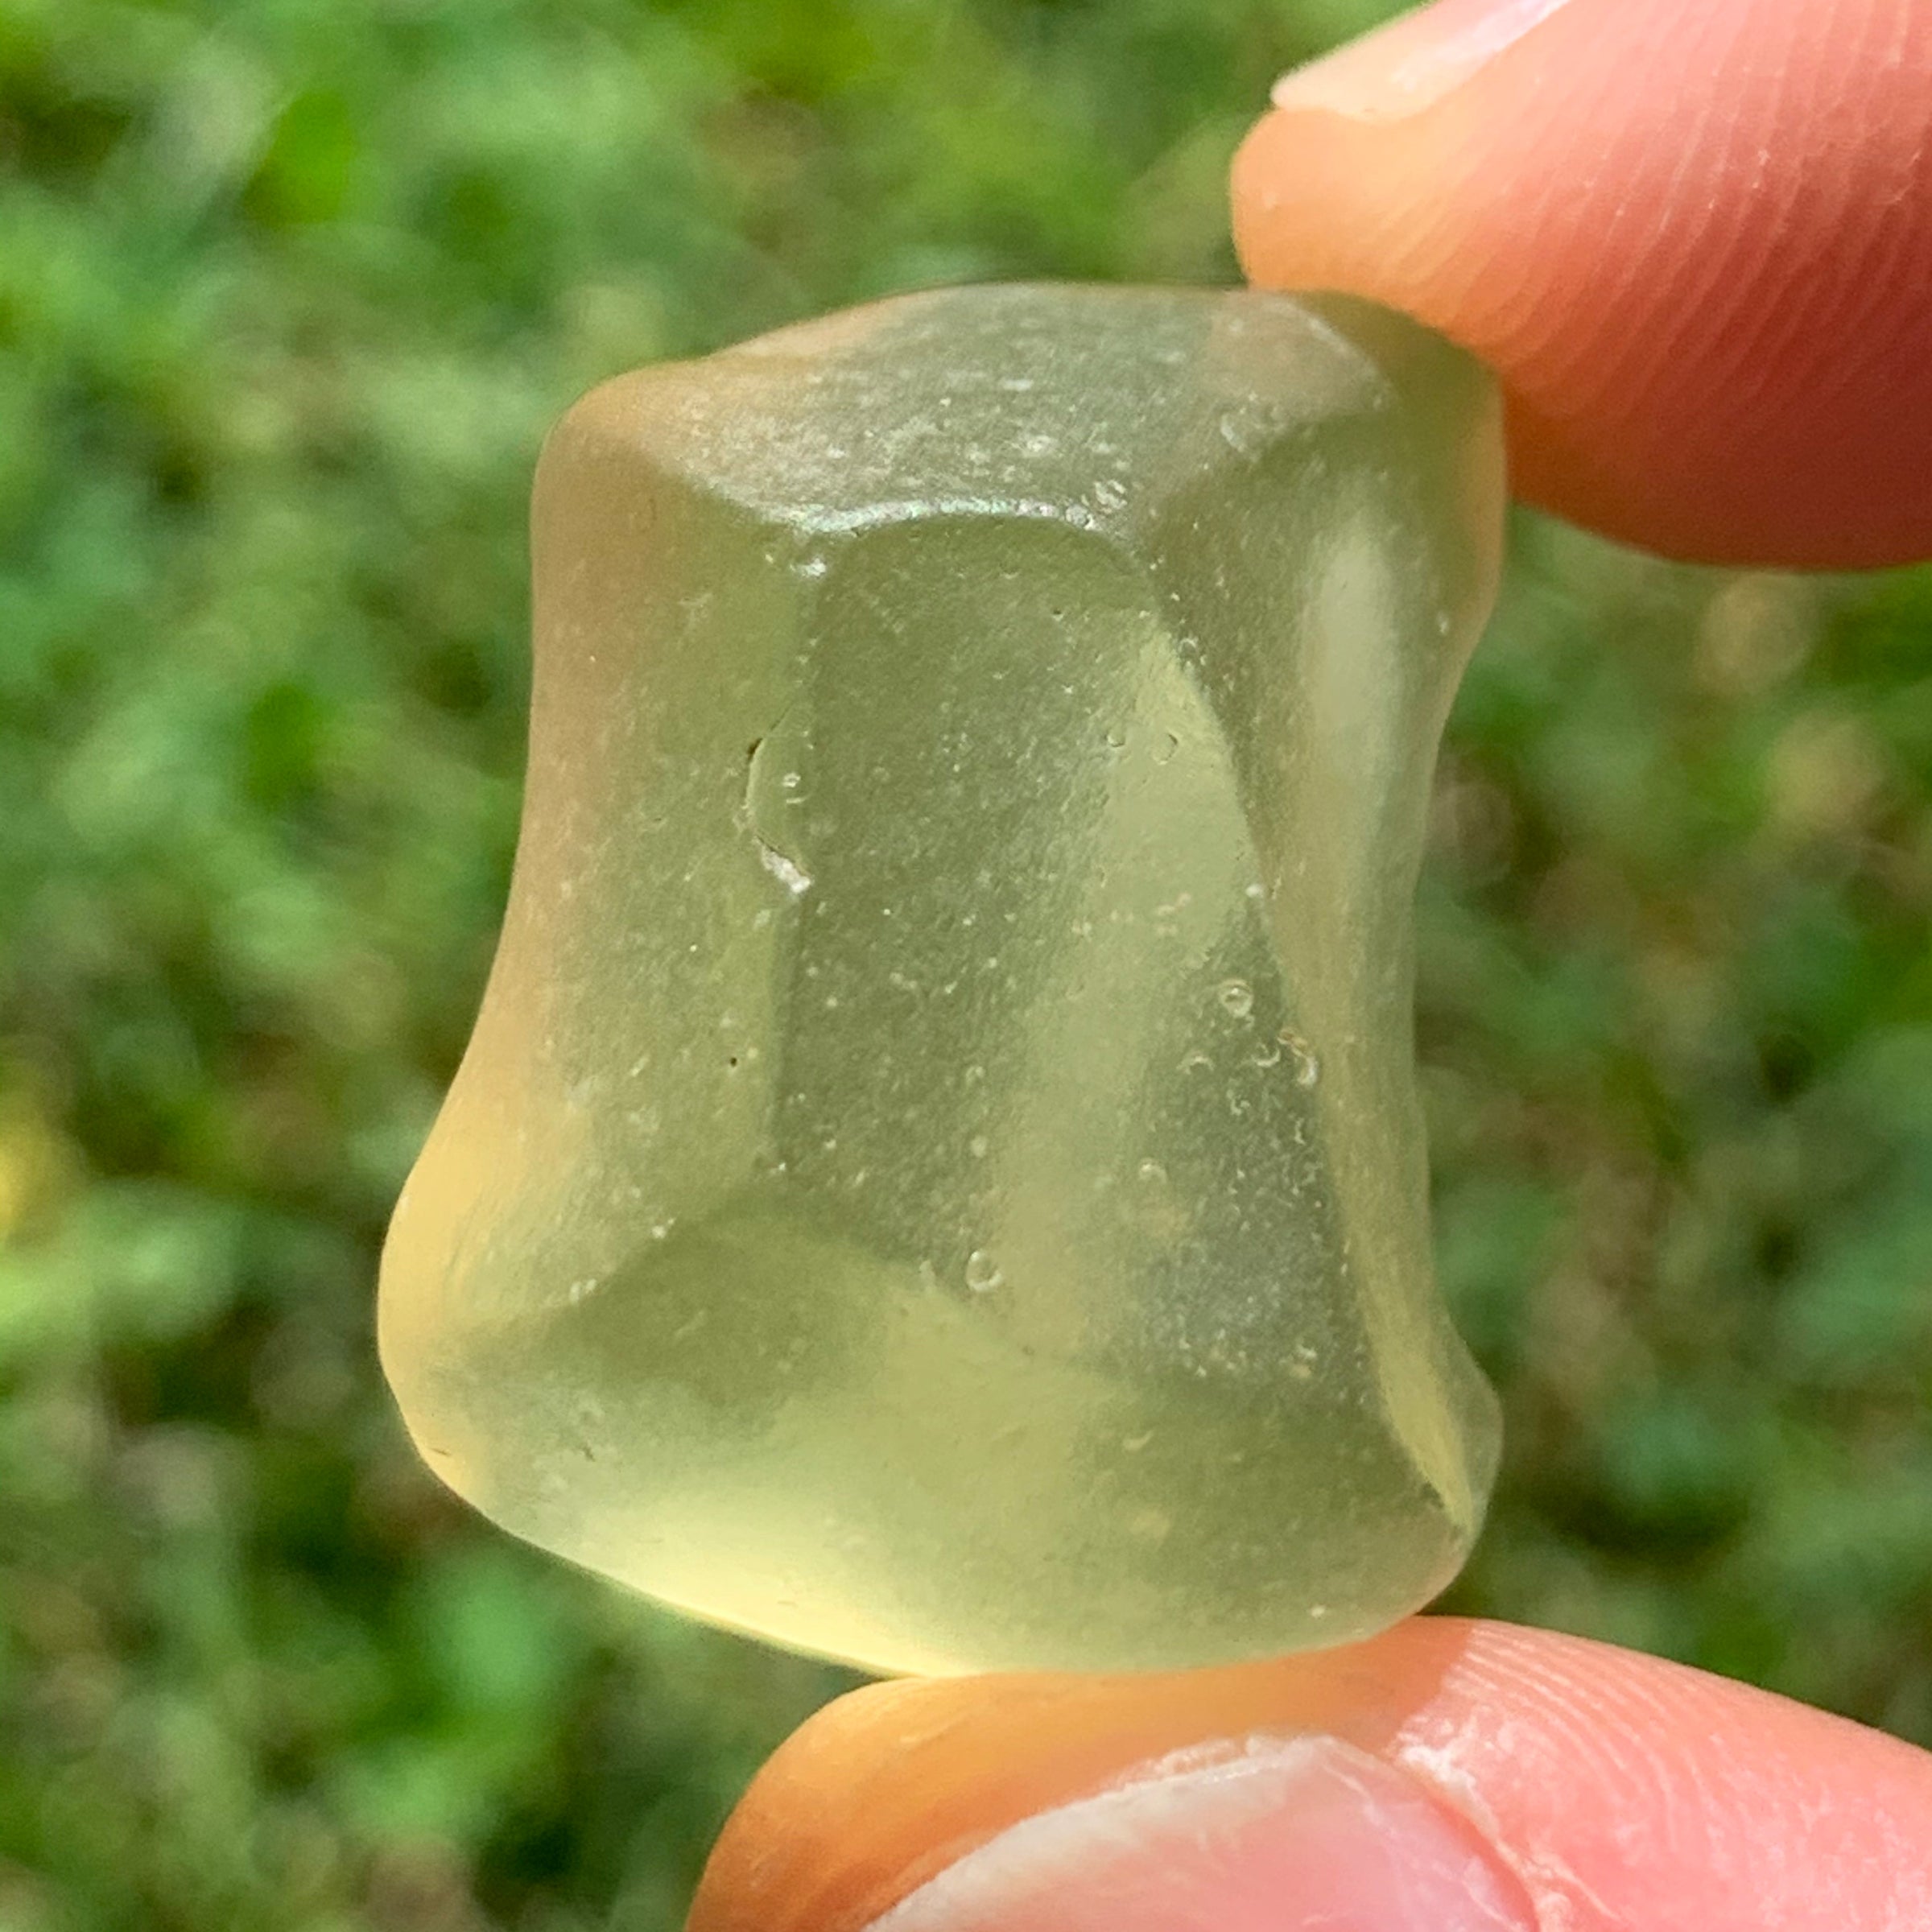 libyan desert glass is held up to show details with sunlight shining on it